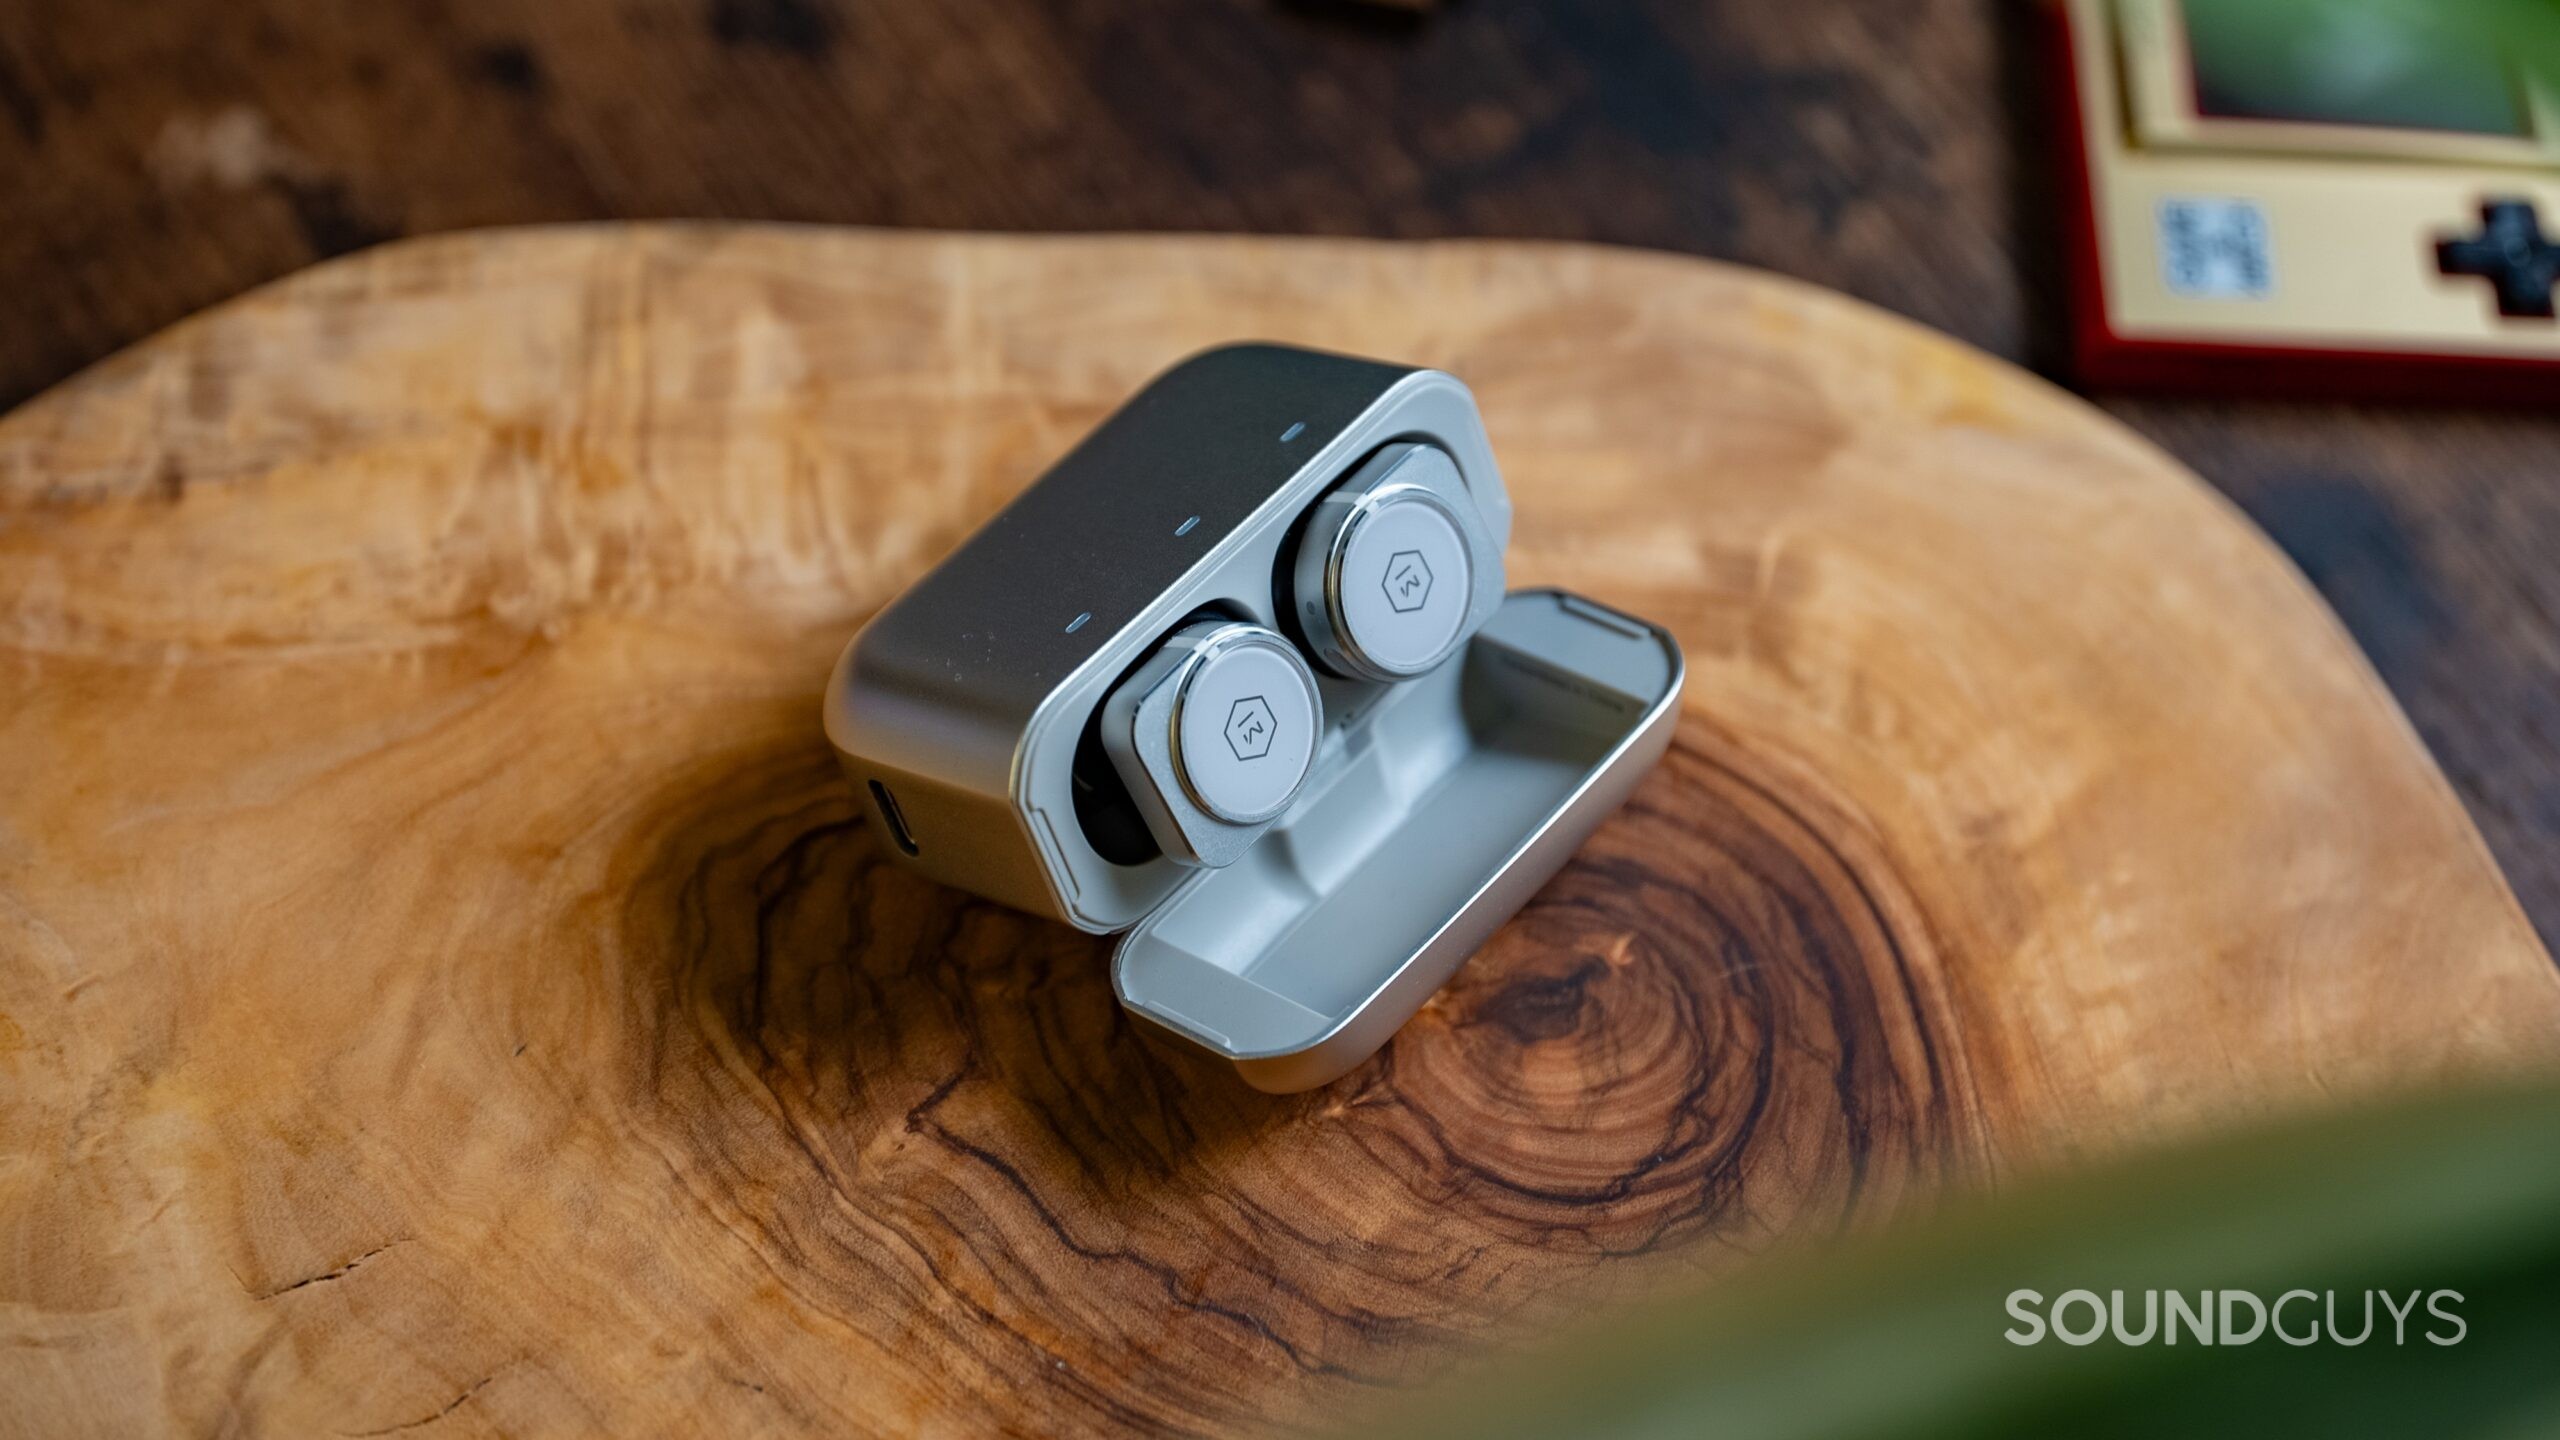 Master & Dynamic MW09 earbuds in their charging case.